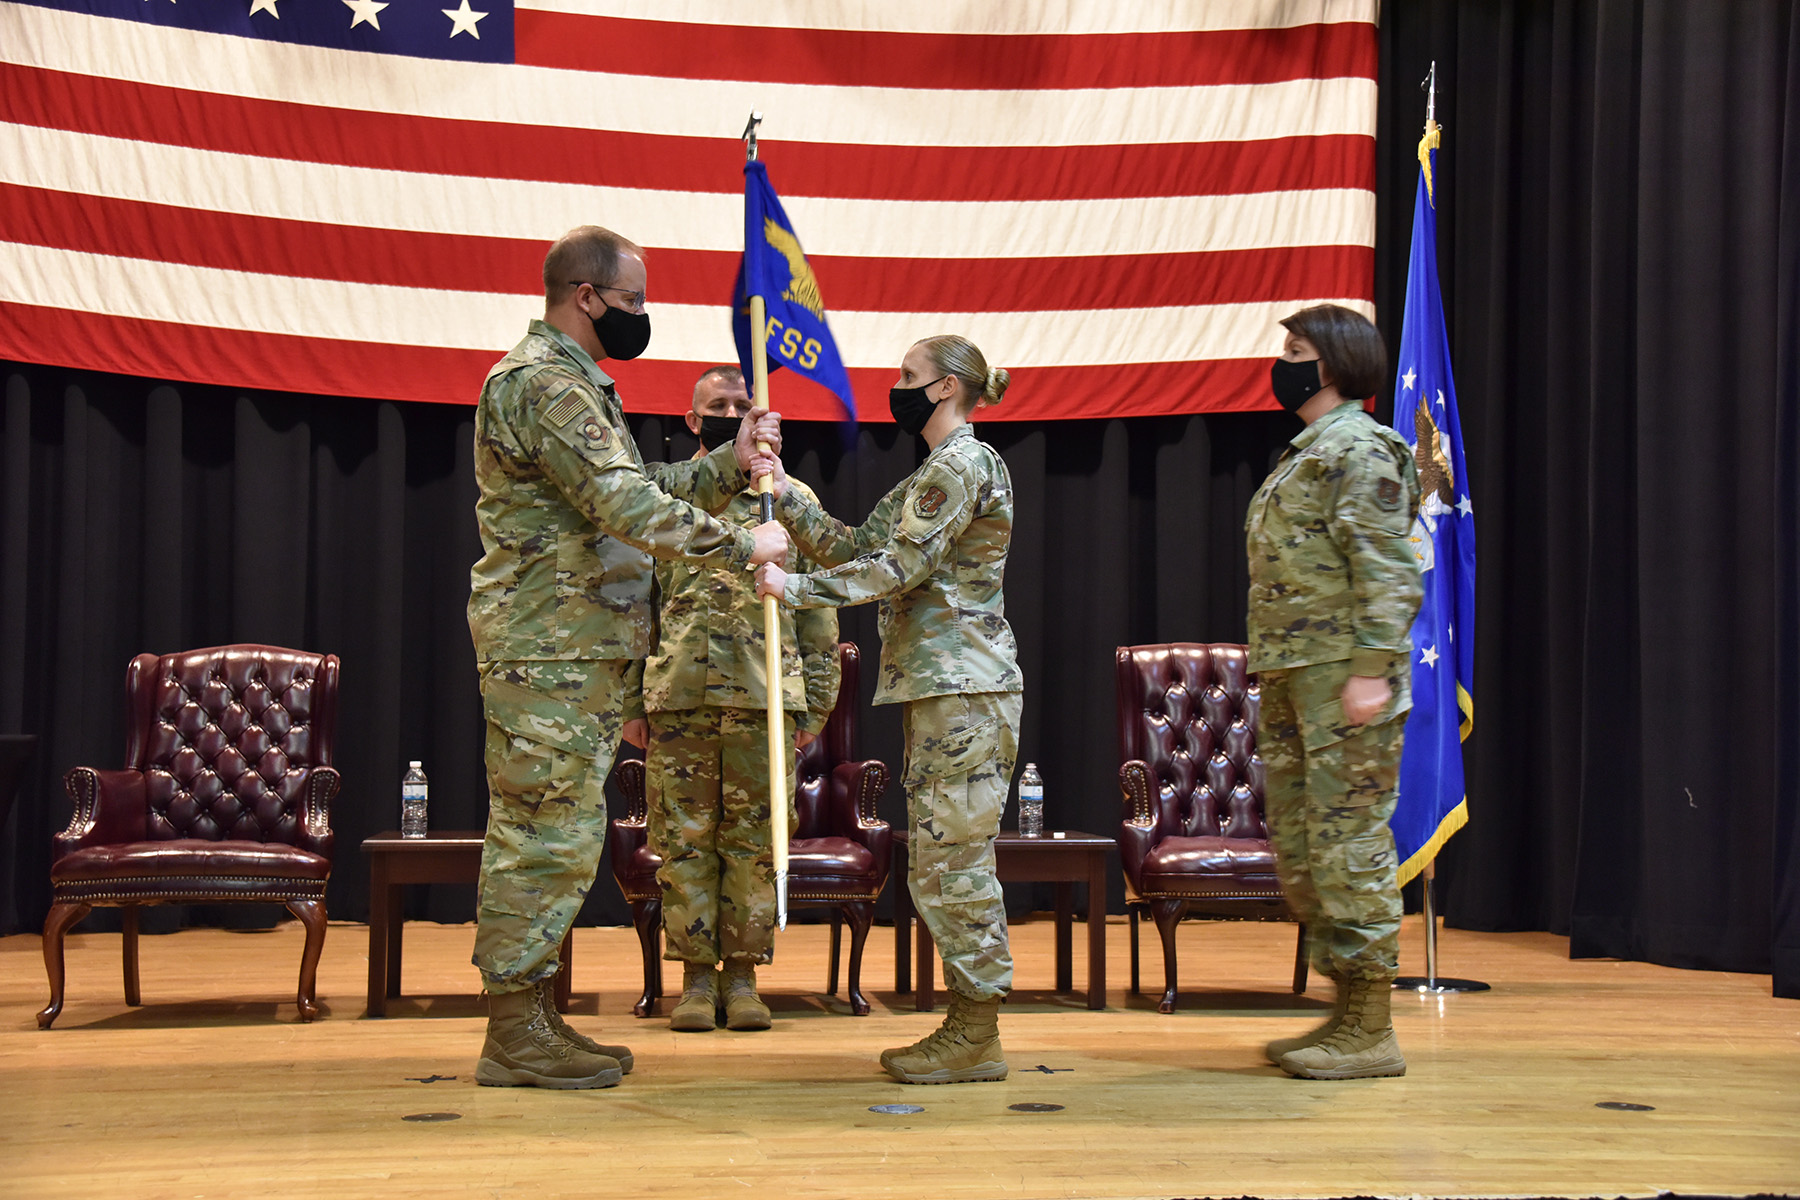 Baggett Assumes Command of the 184th Force Support Squadron